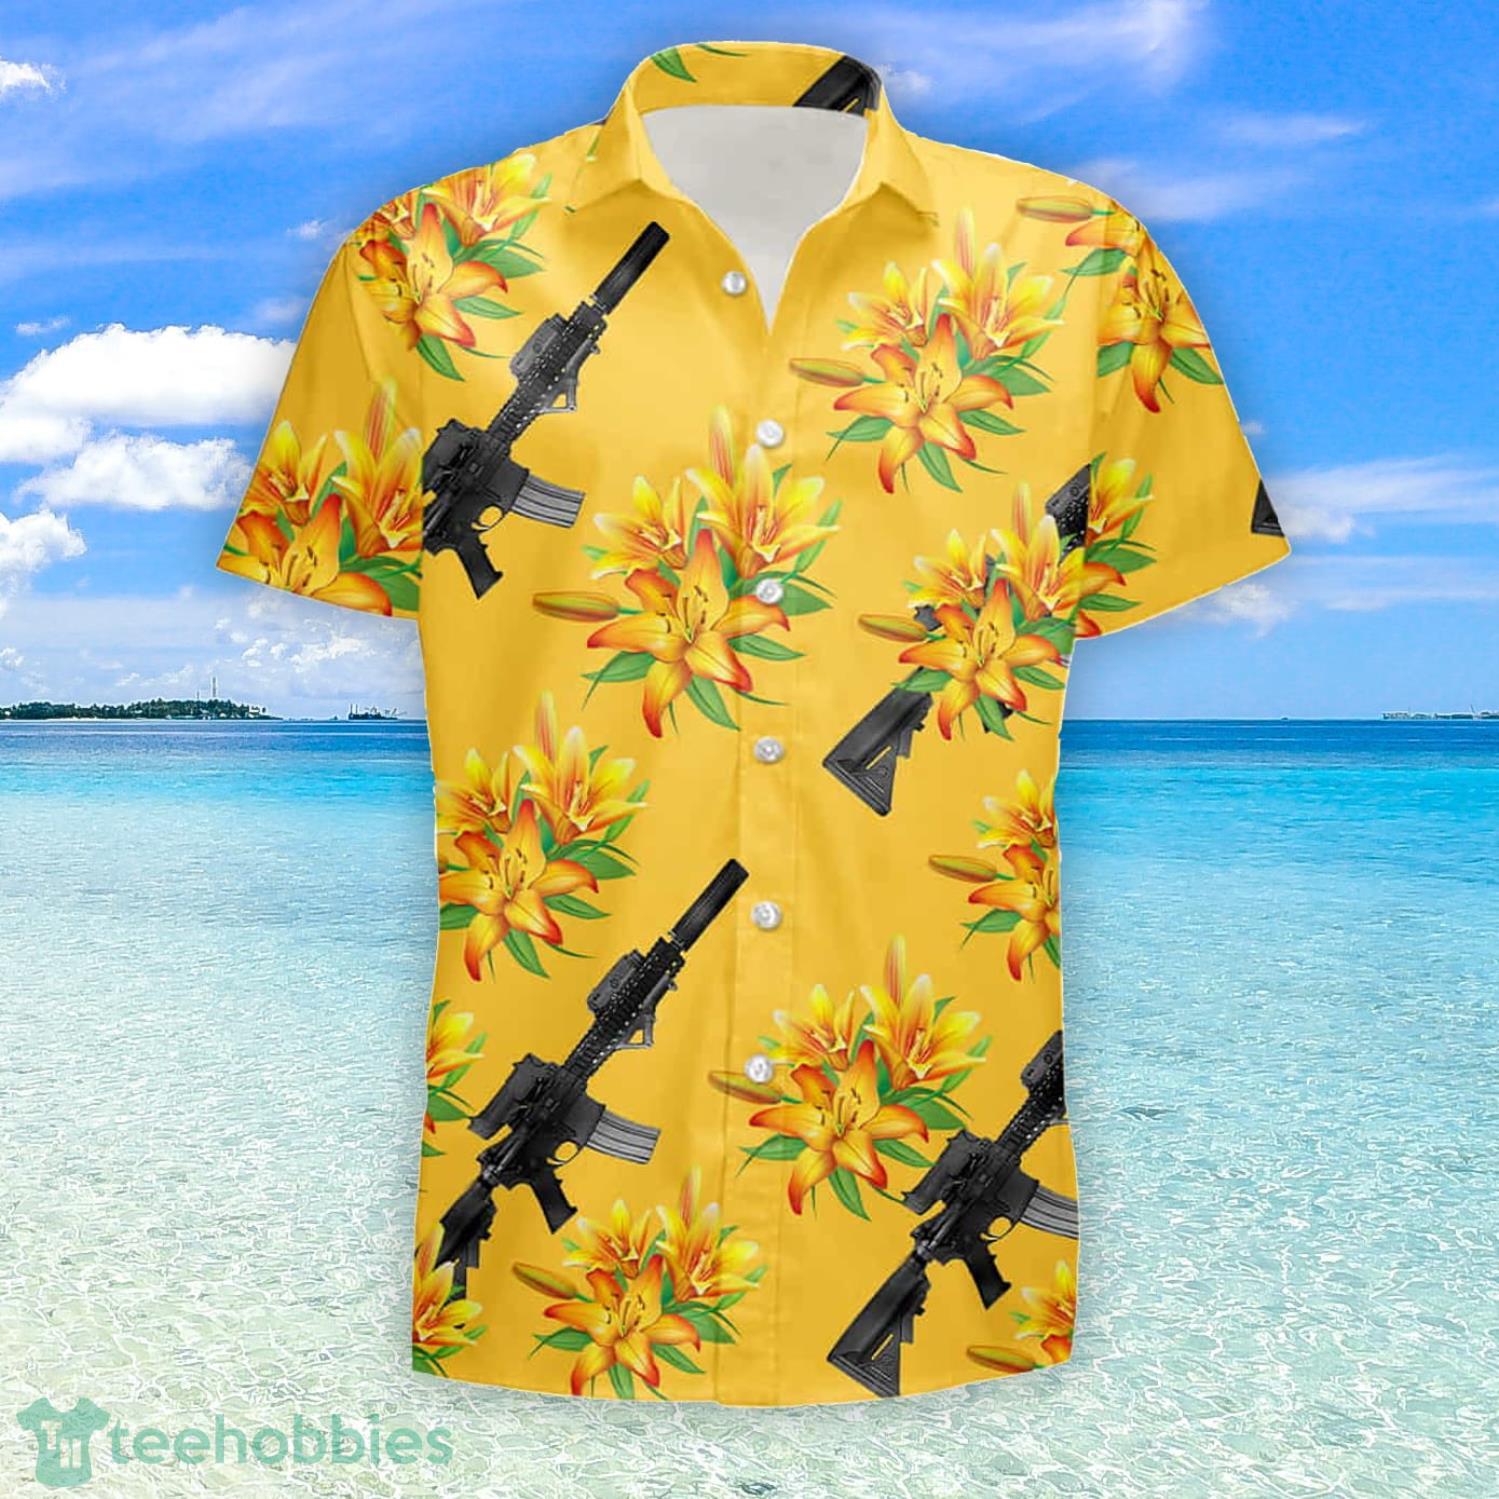 Boston Red Sox Logo And Yellow Flower Tropical Hawaiian Shirt For Fans -  Freedomdesign